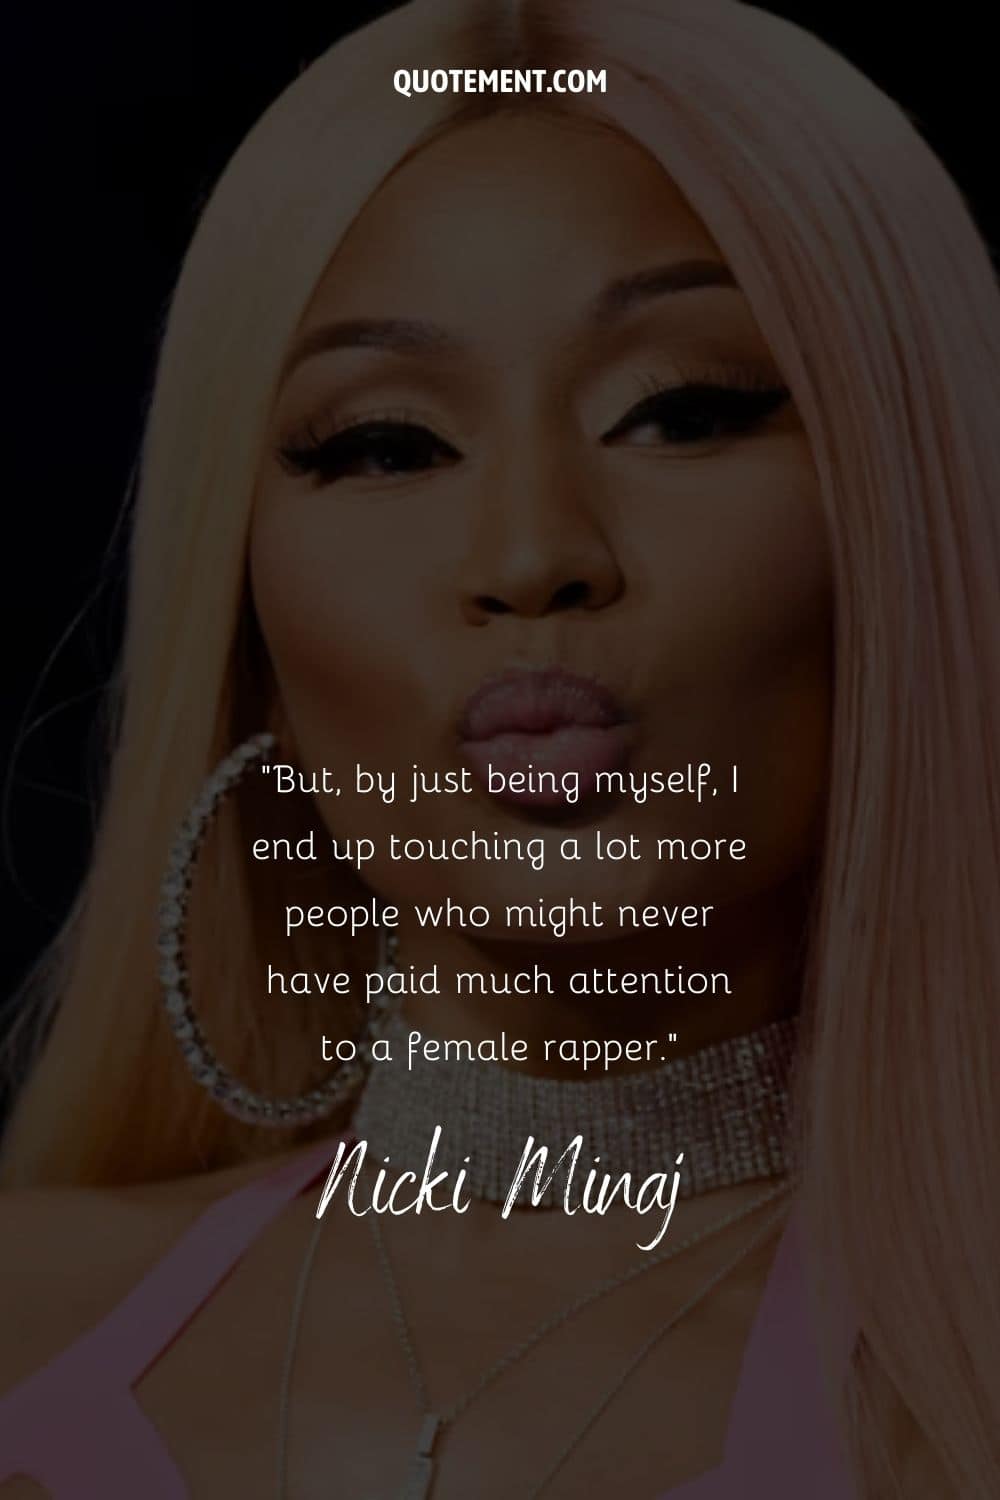 Best Nicki Minaj quote and her portrait in the background